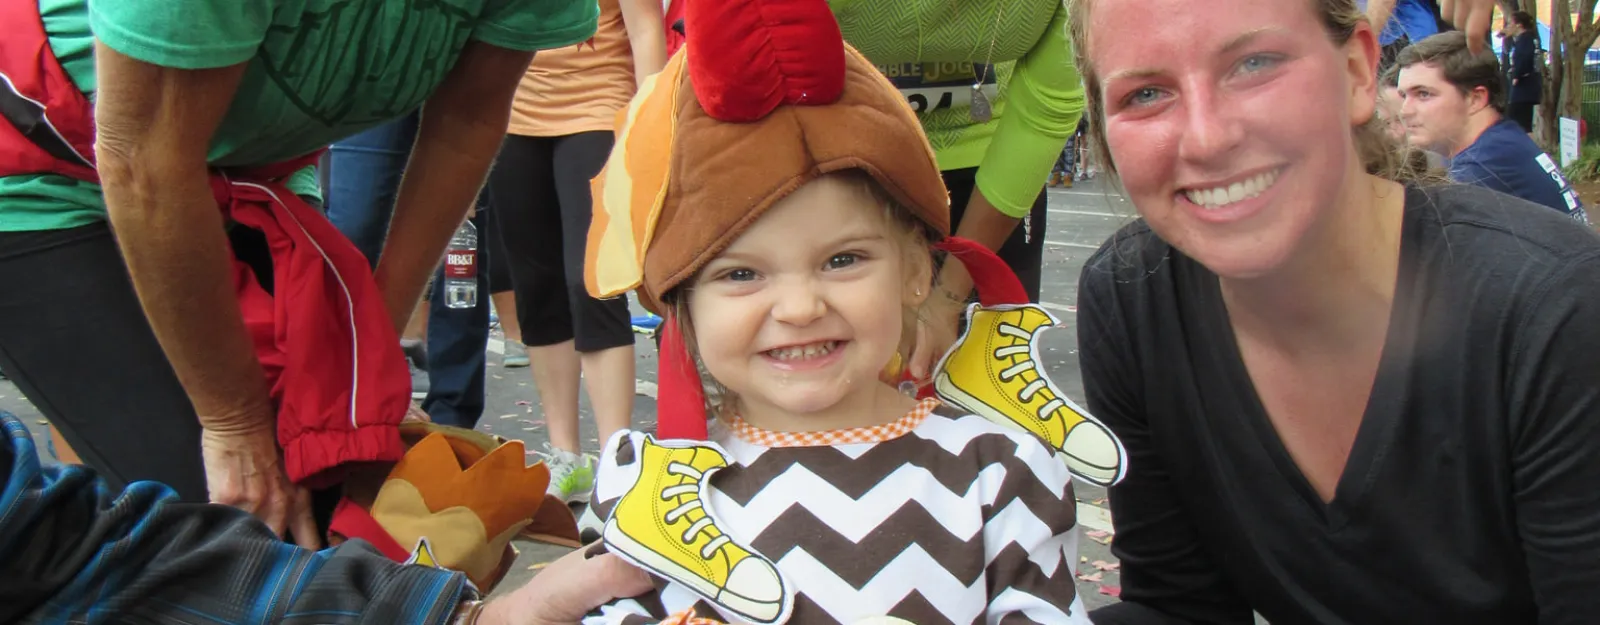                                     Gobble Jog benefits thousands of clients in need                   